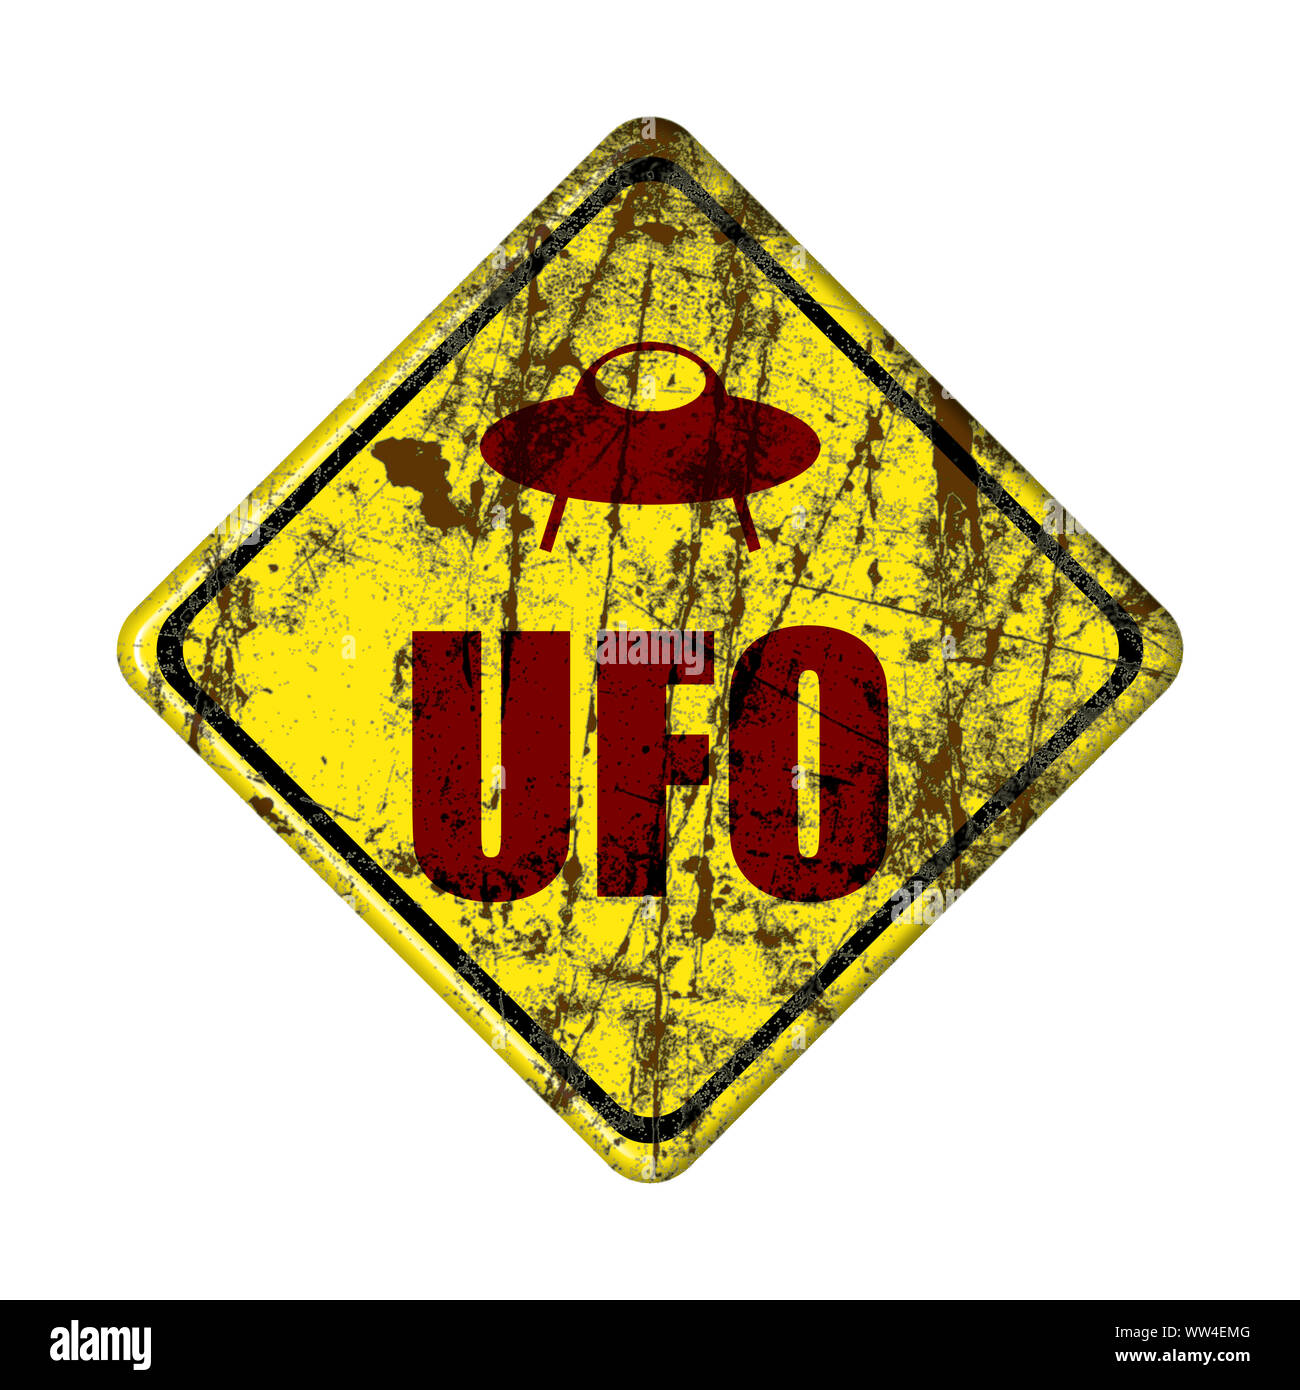 old Humorous danger road signs for UFO, aliens abduction theme, Yellow road sign with Ufo Activity Area. Stock Photo